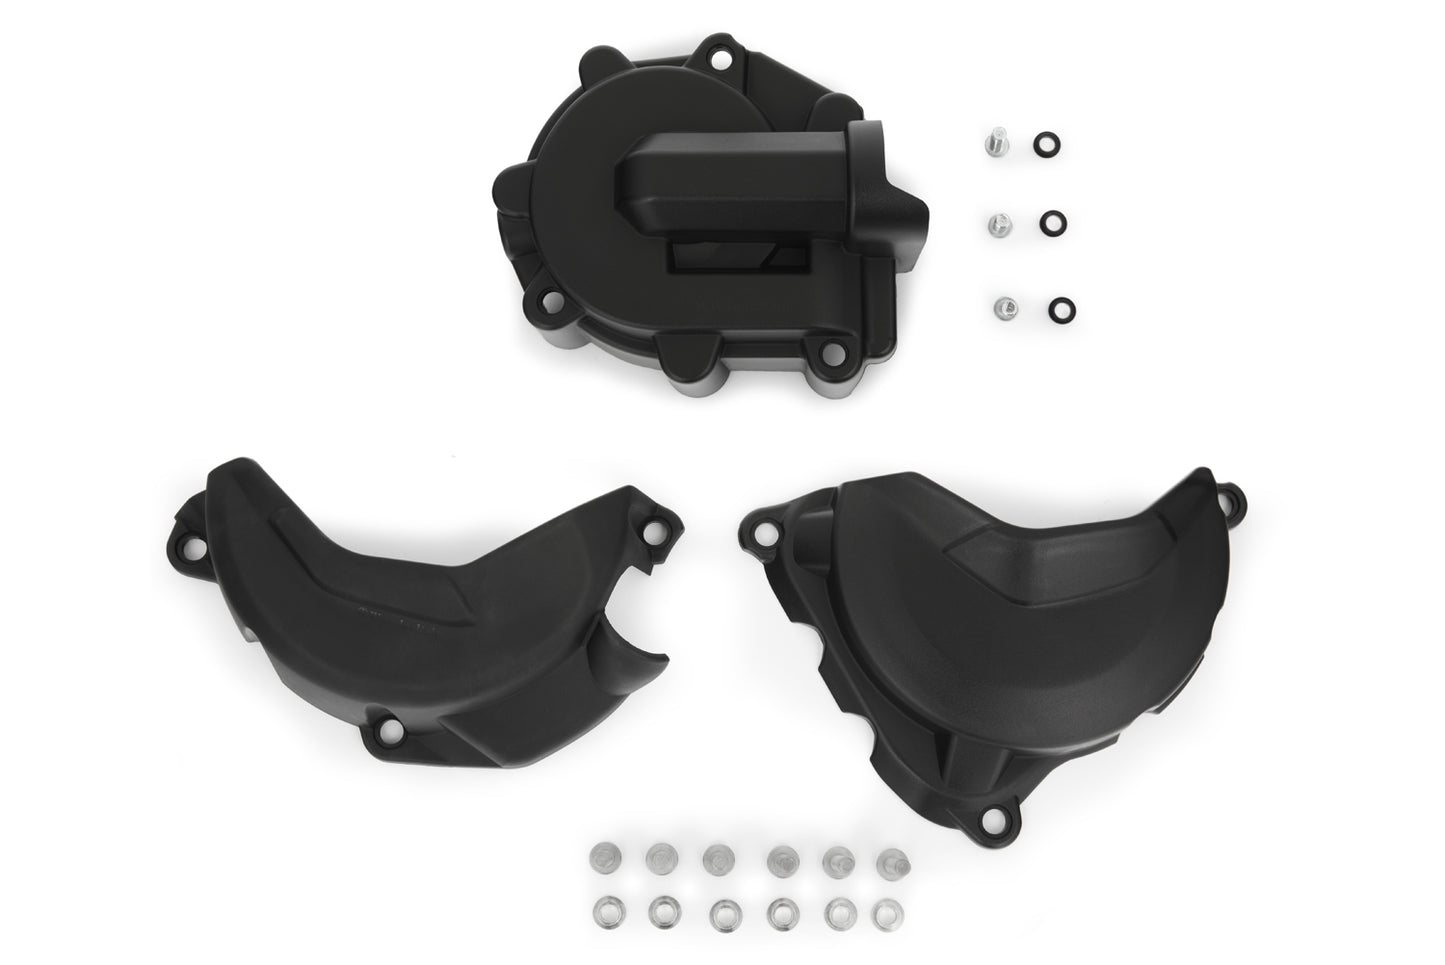 Wunderlich protective cover set for clutch, alternator and water pump - black